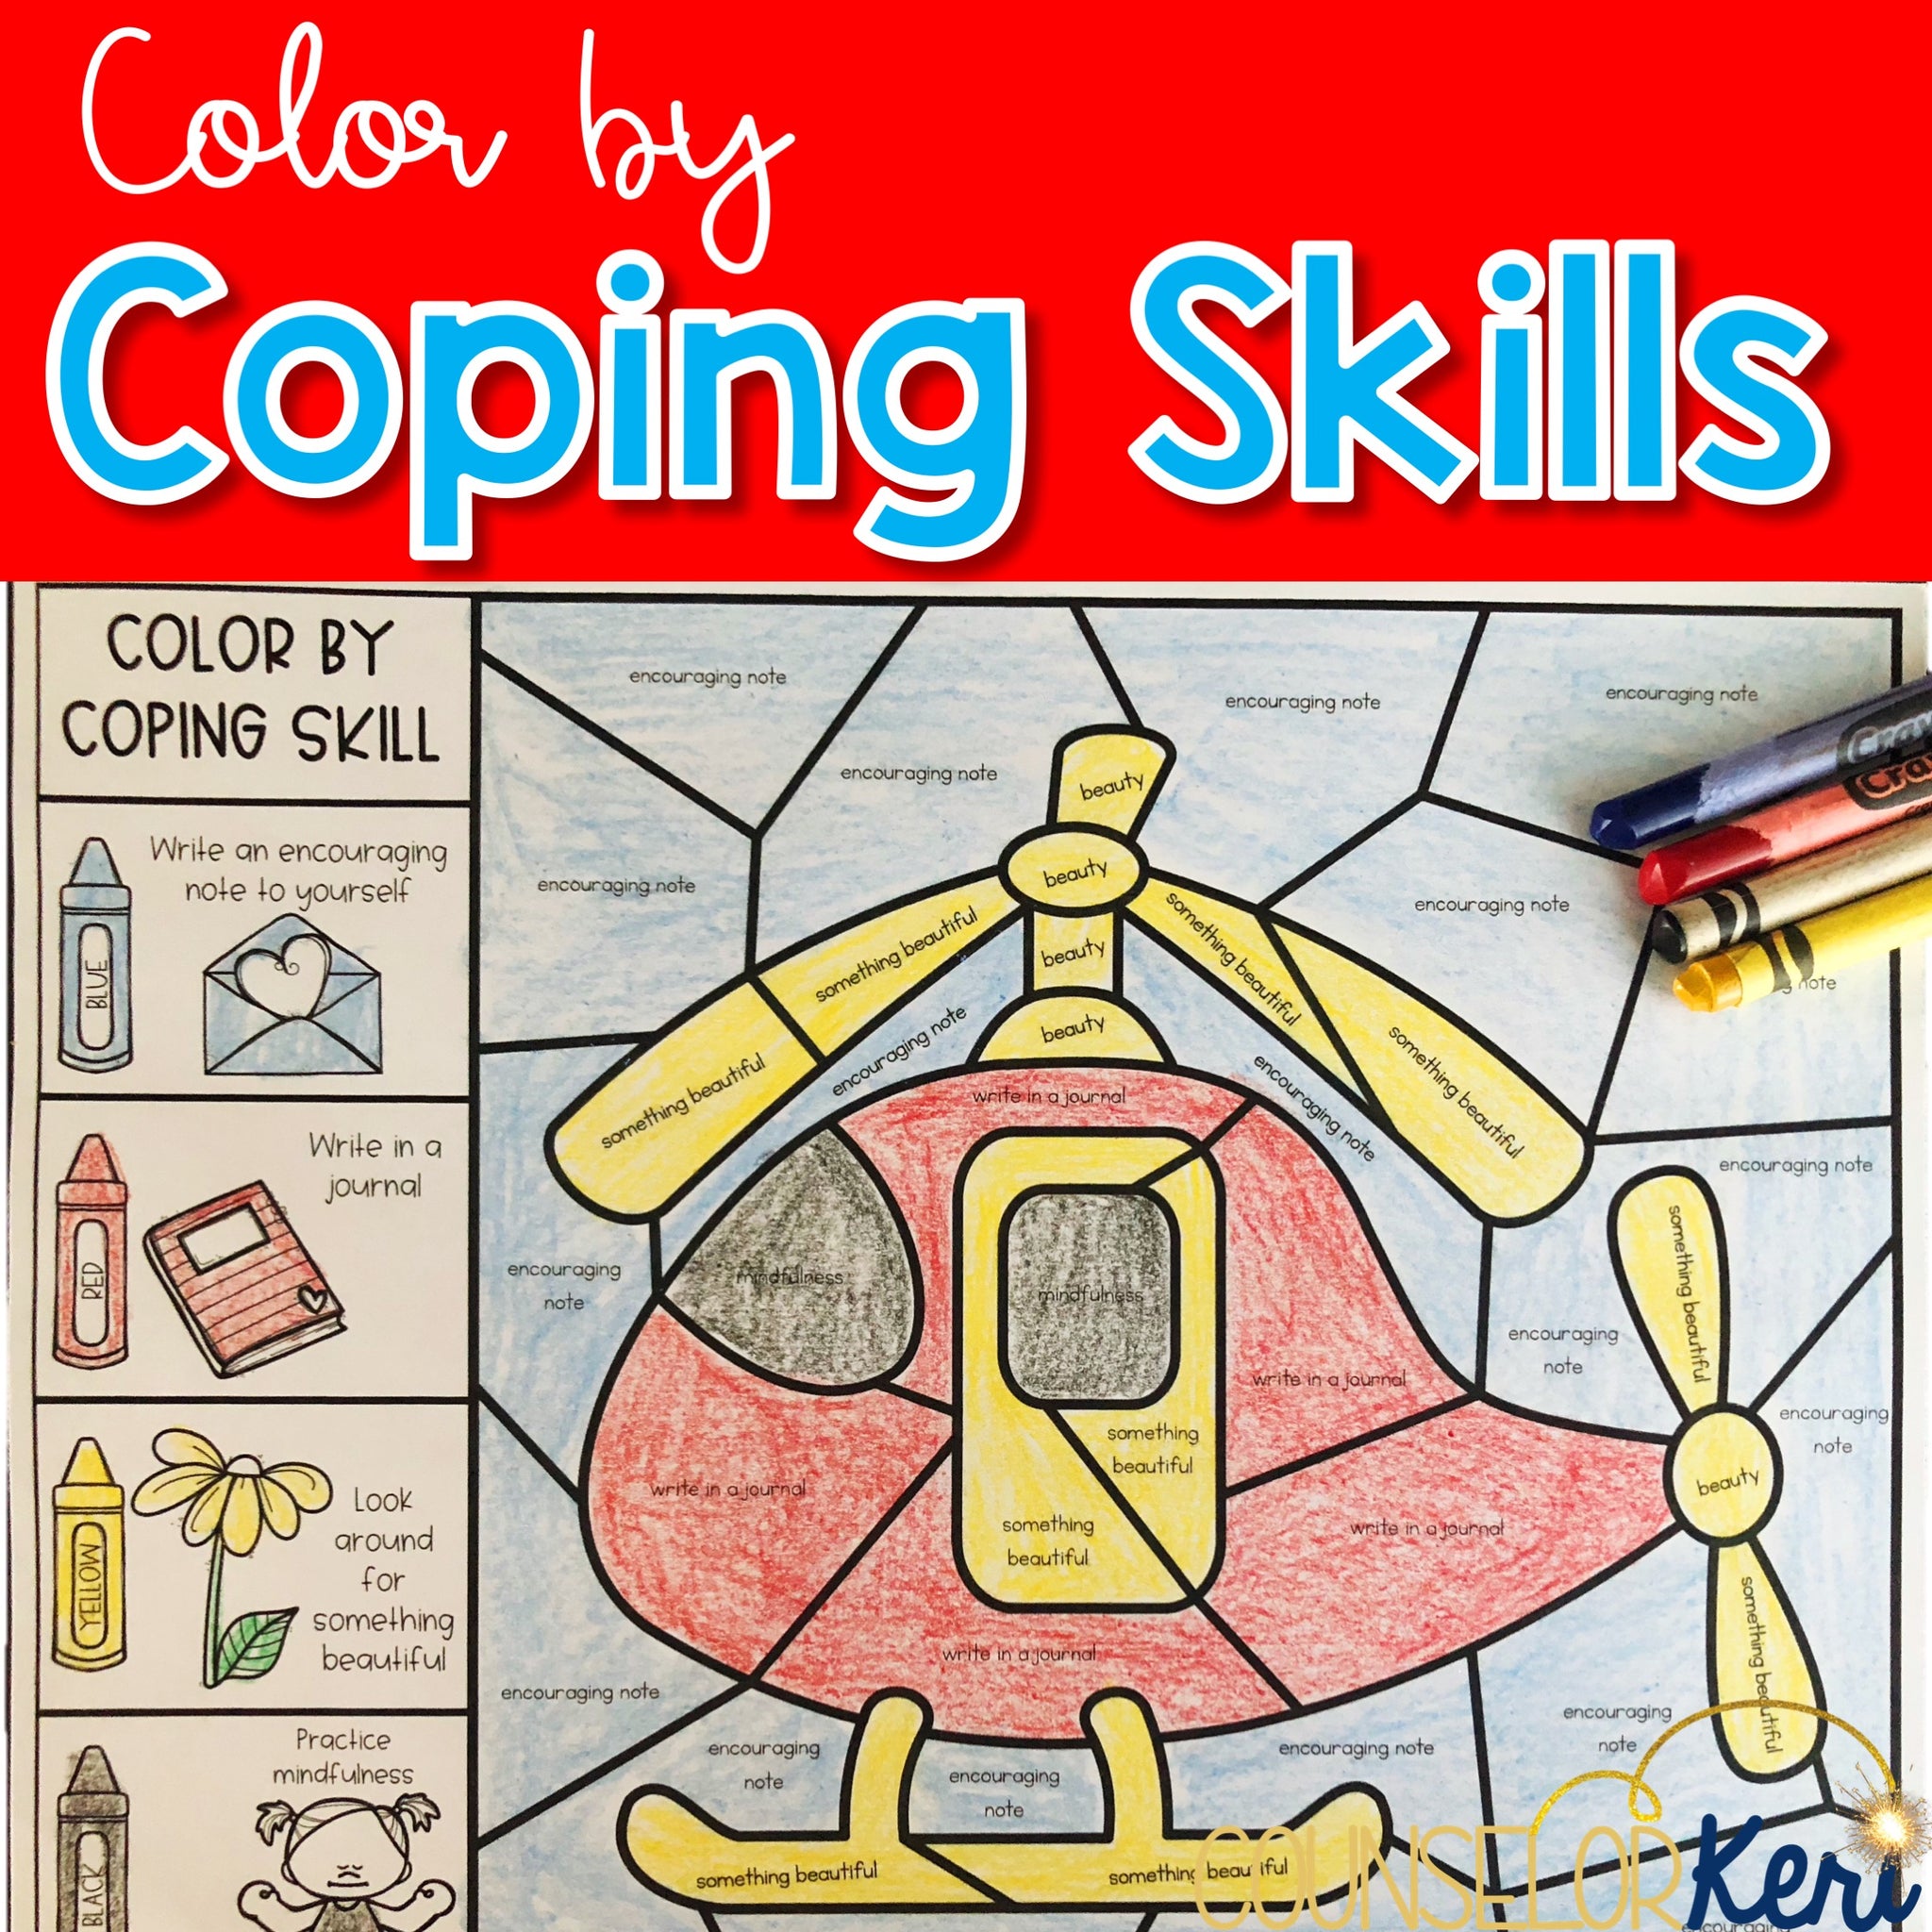 coping-skills-color-by-code-calming-strategies-activity-for-school-co-counselor-keri